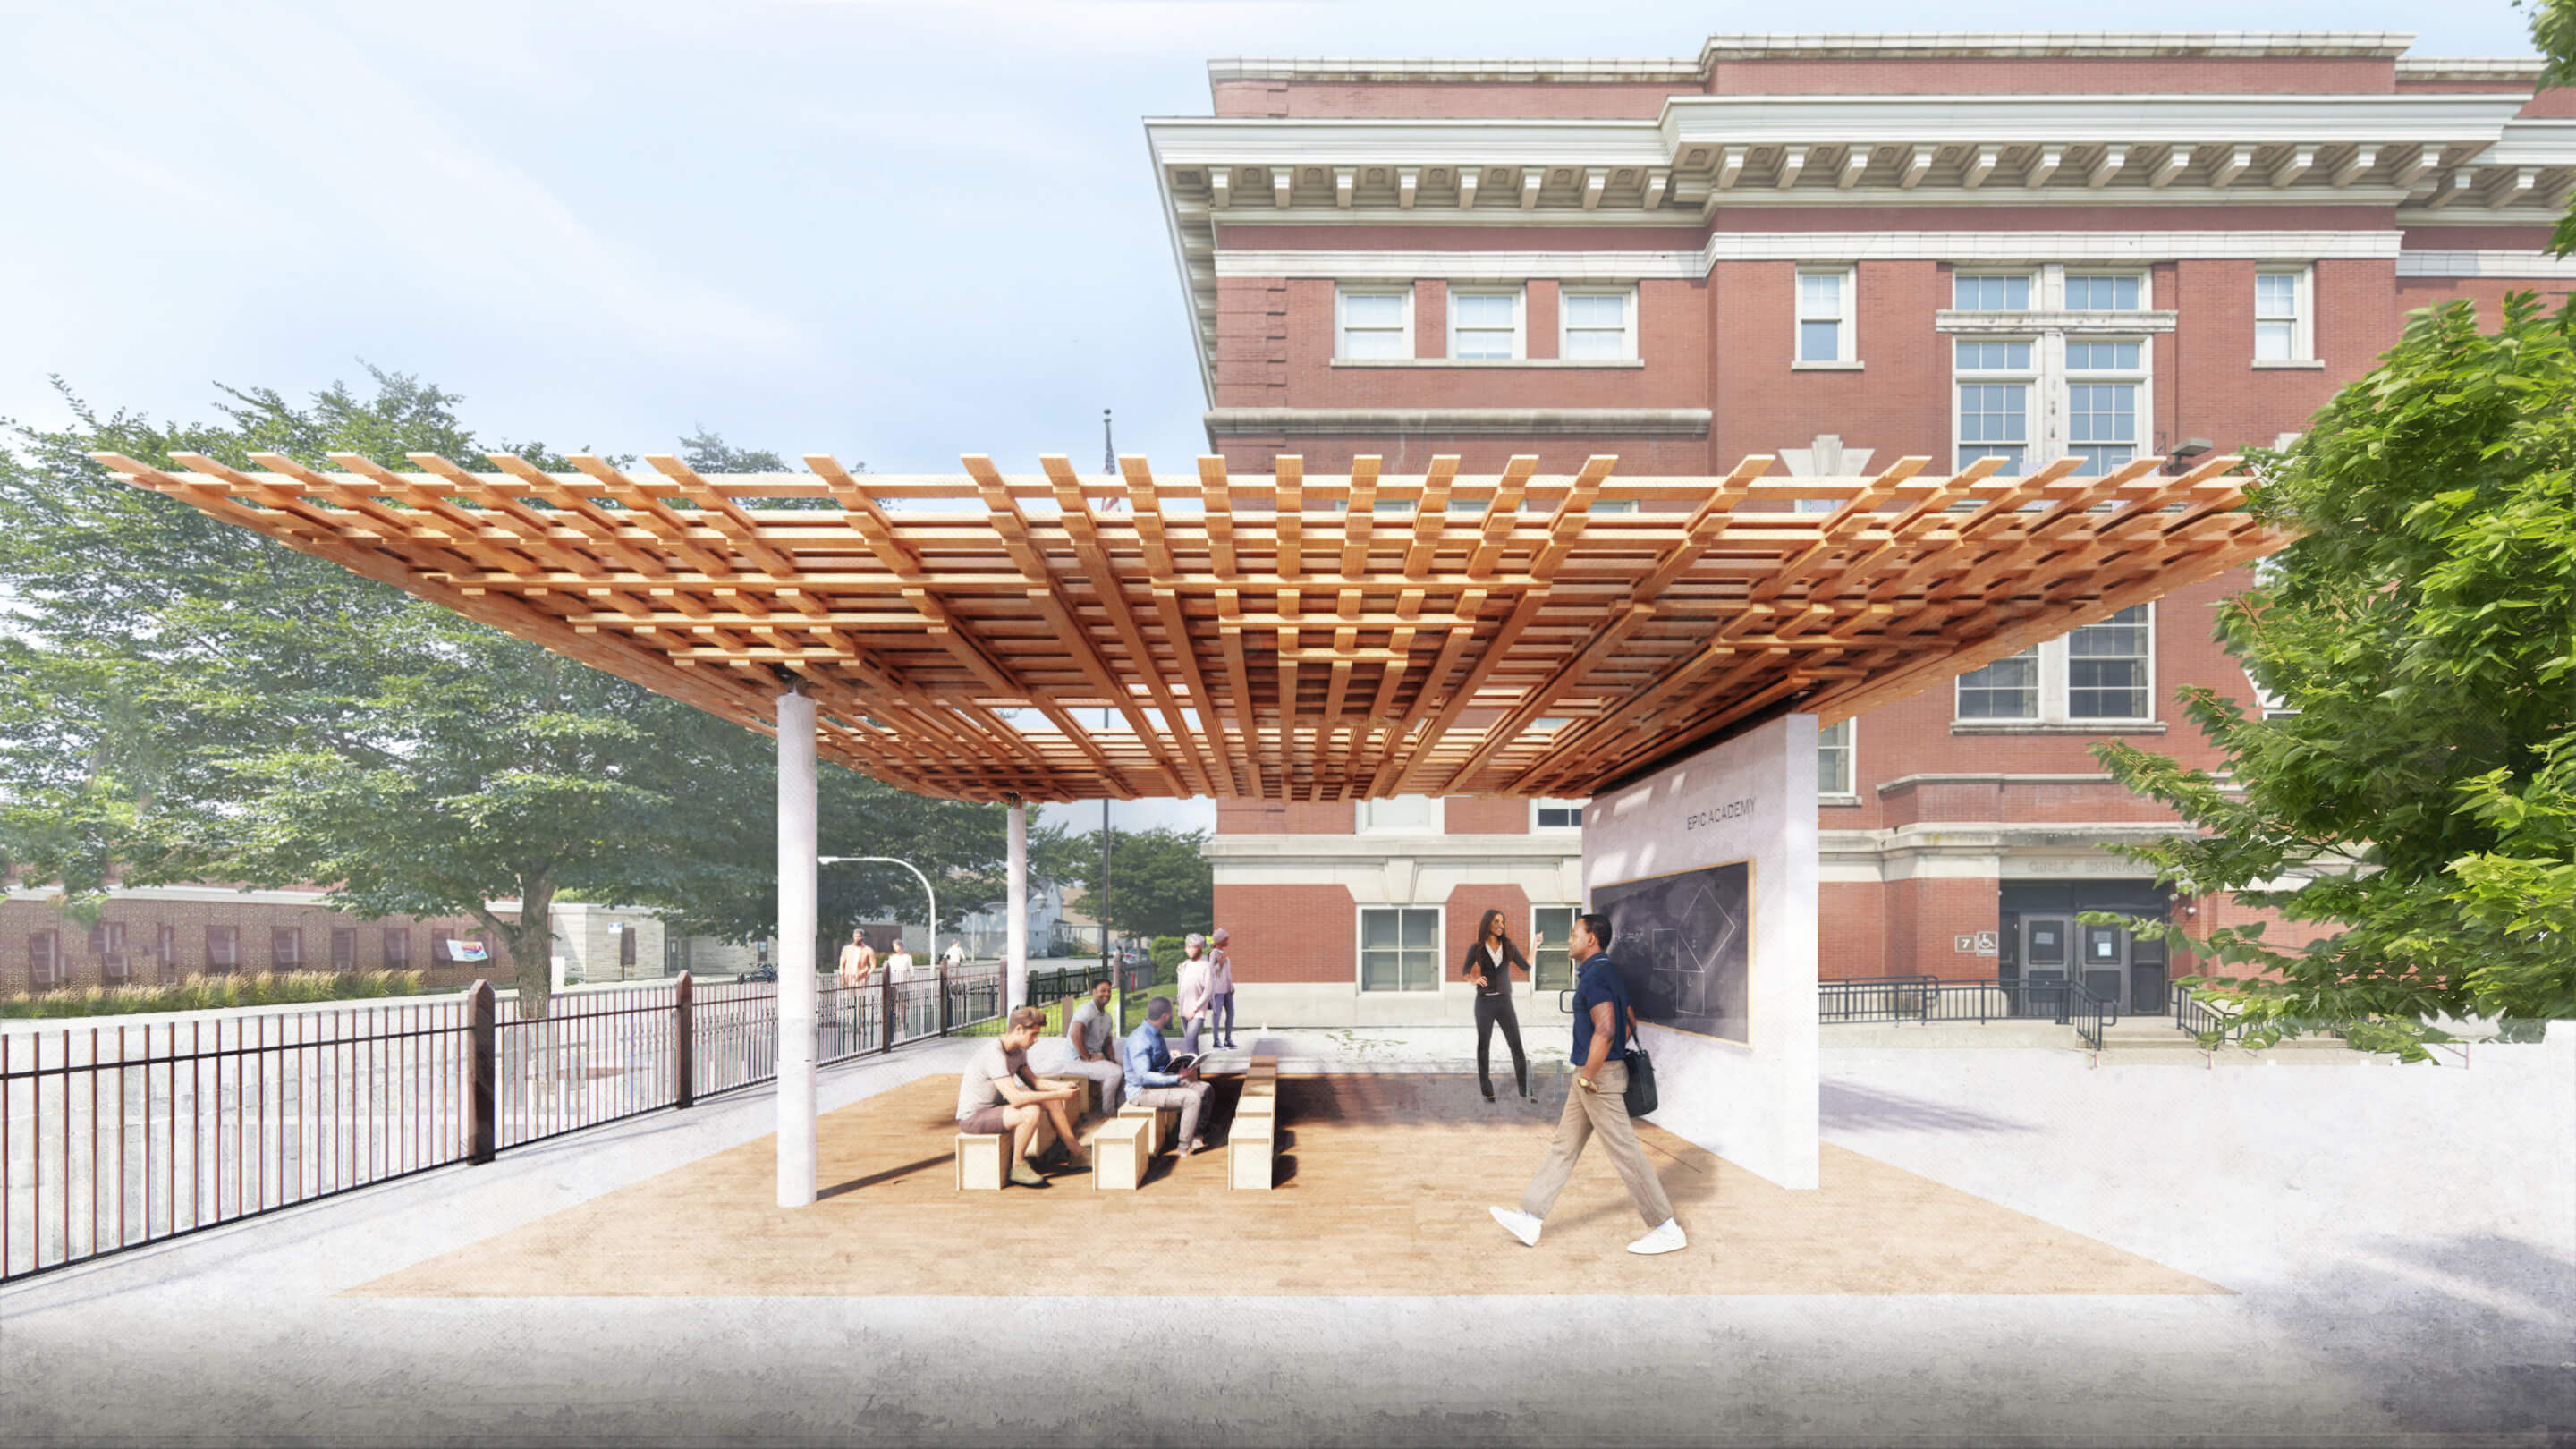 rendering of an outdoor pavilion